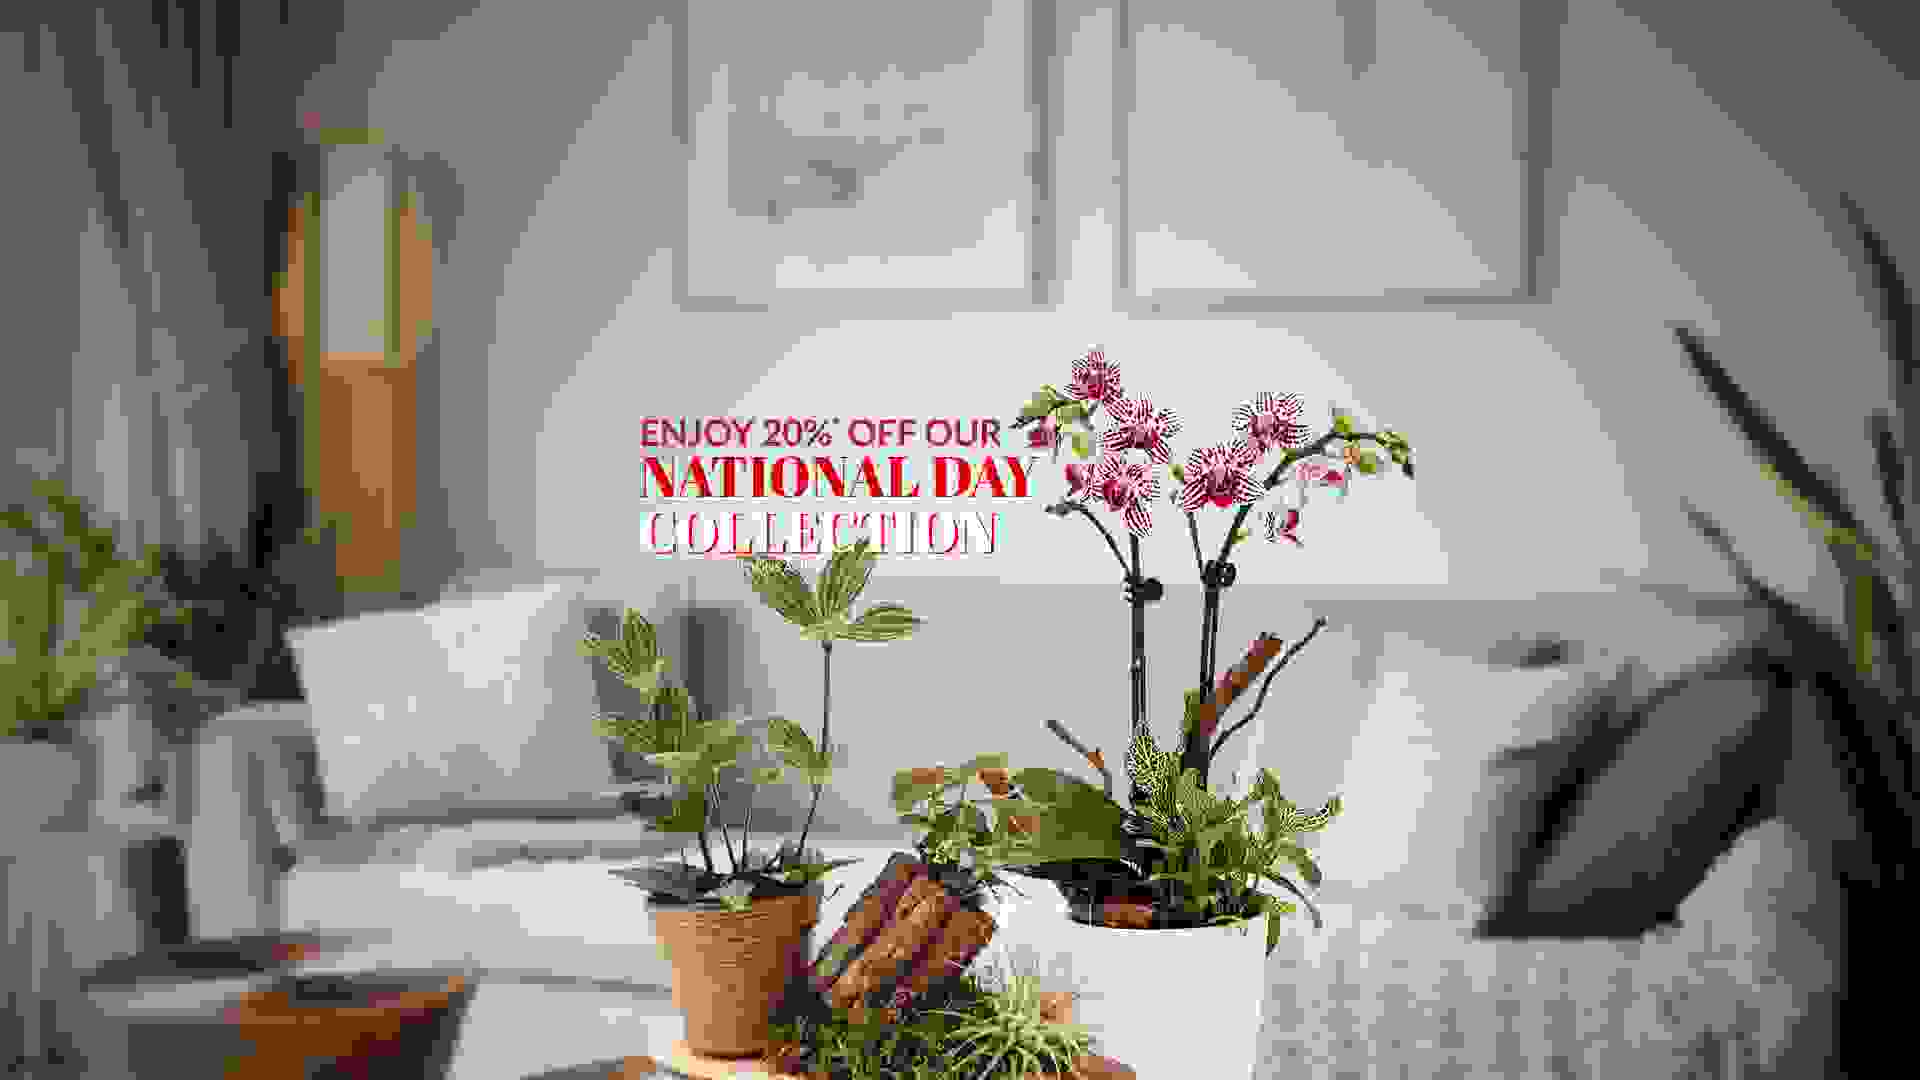 Beautify your home this National Day